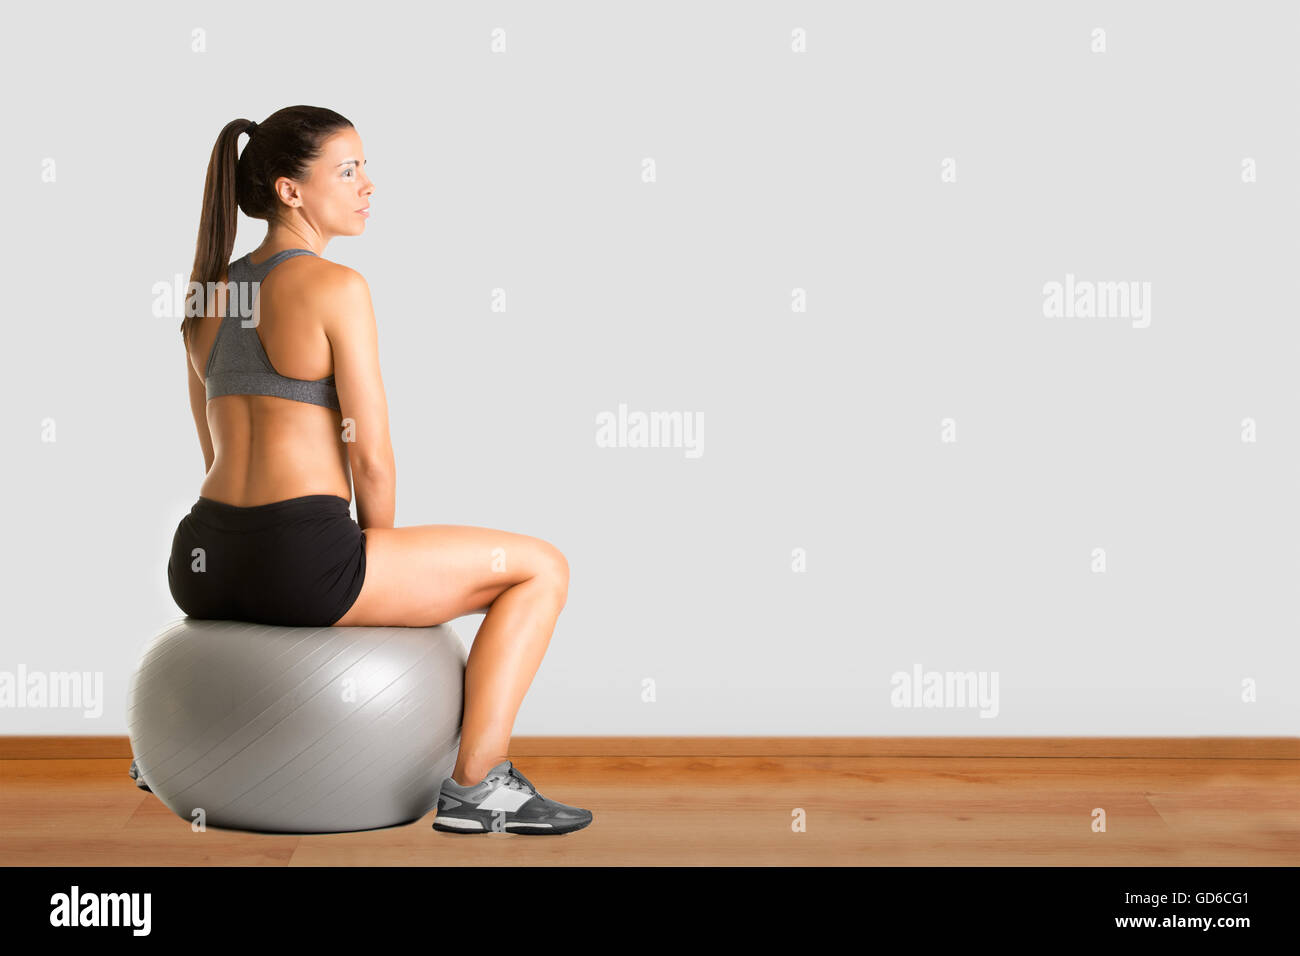 Fit woman sitting on a yoga ball, in a gym Stock Photo